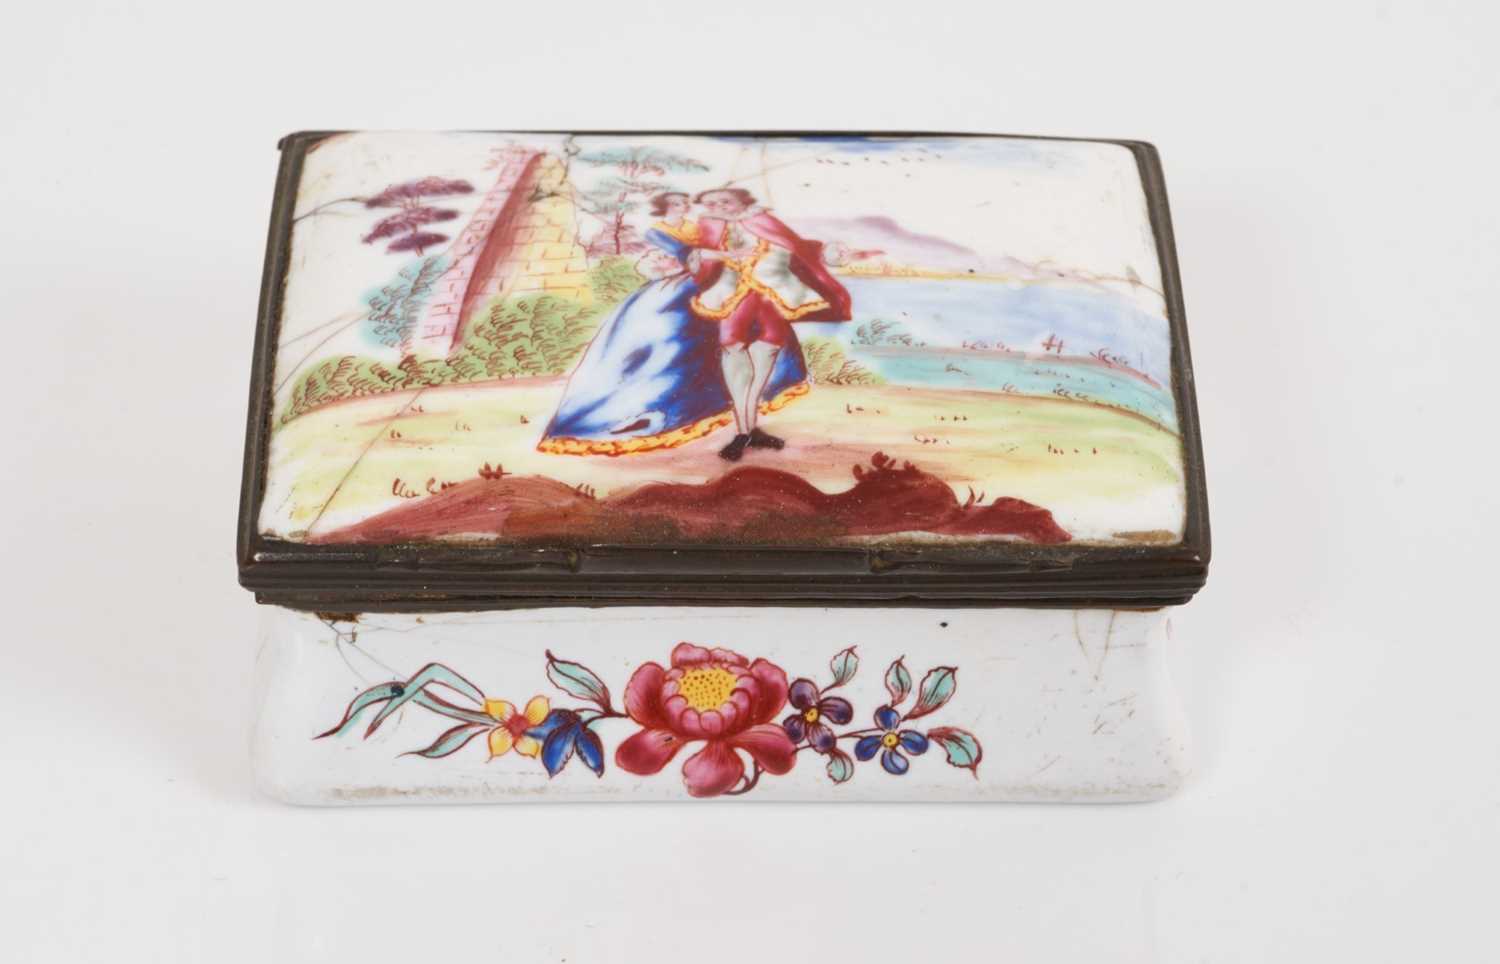 Lot 159 - Large South Staffordshire enamel rectangular snuff box, painted with a couple, circa 1760